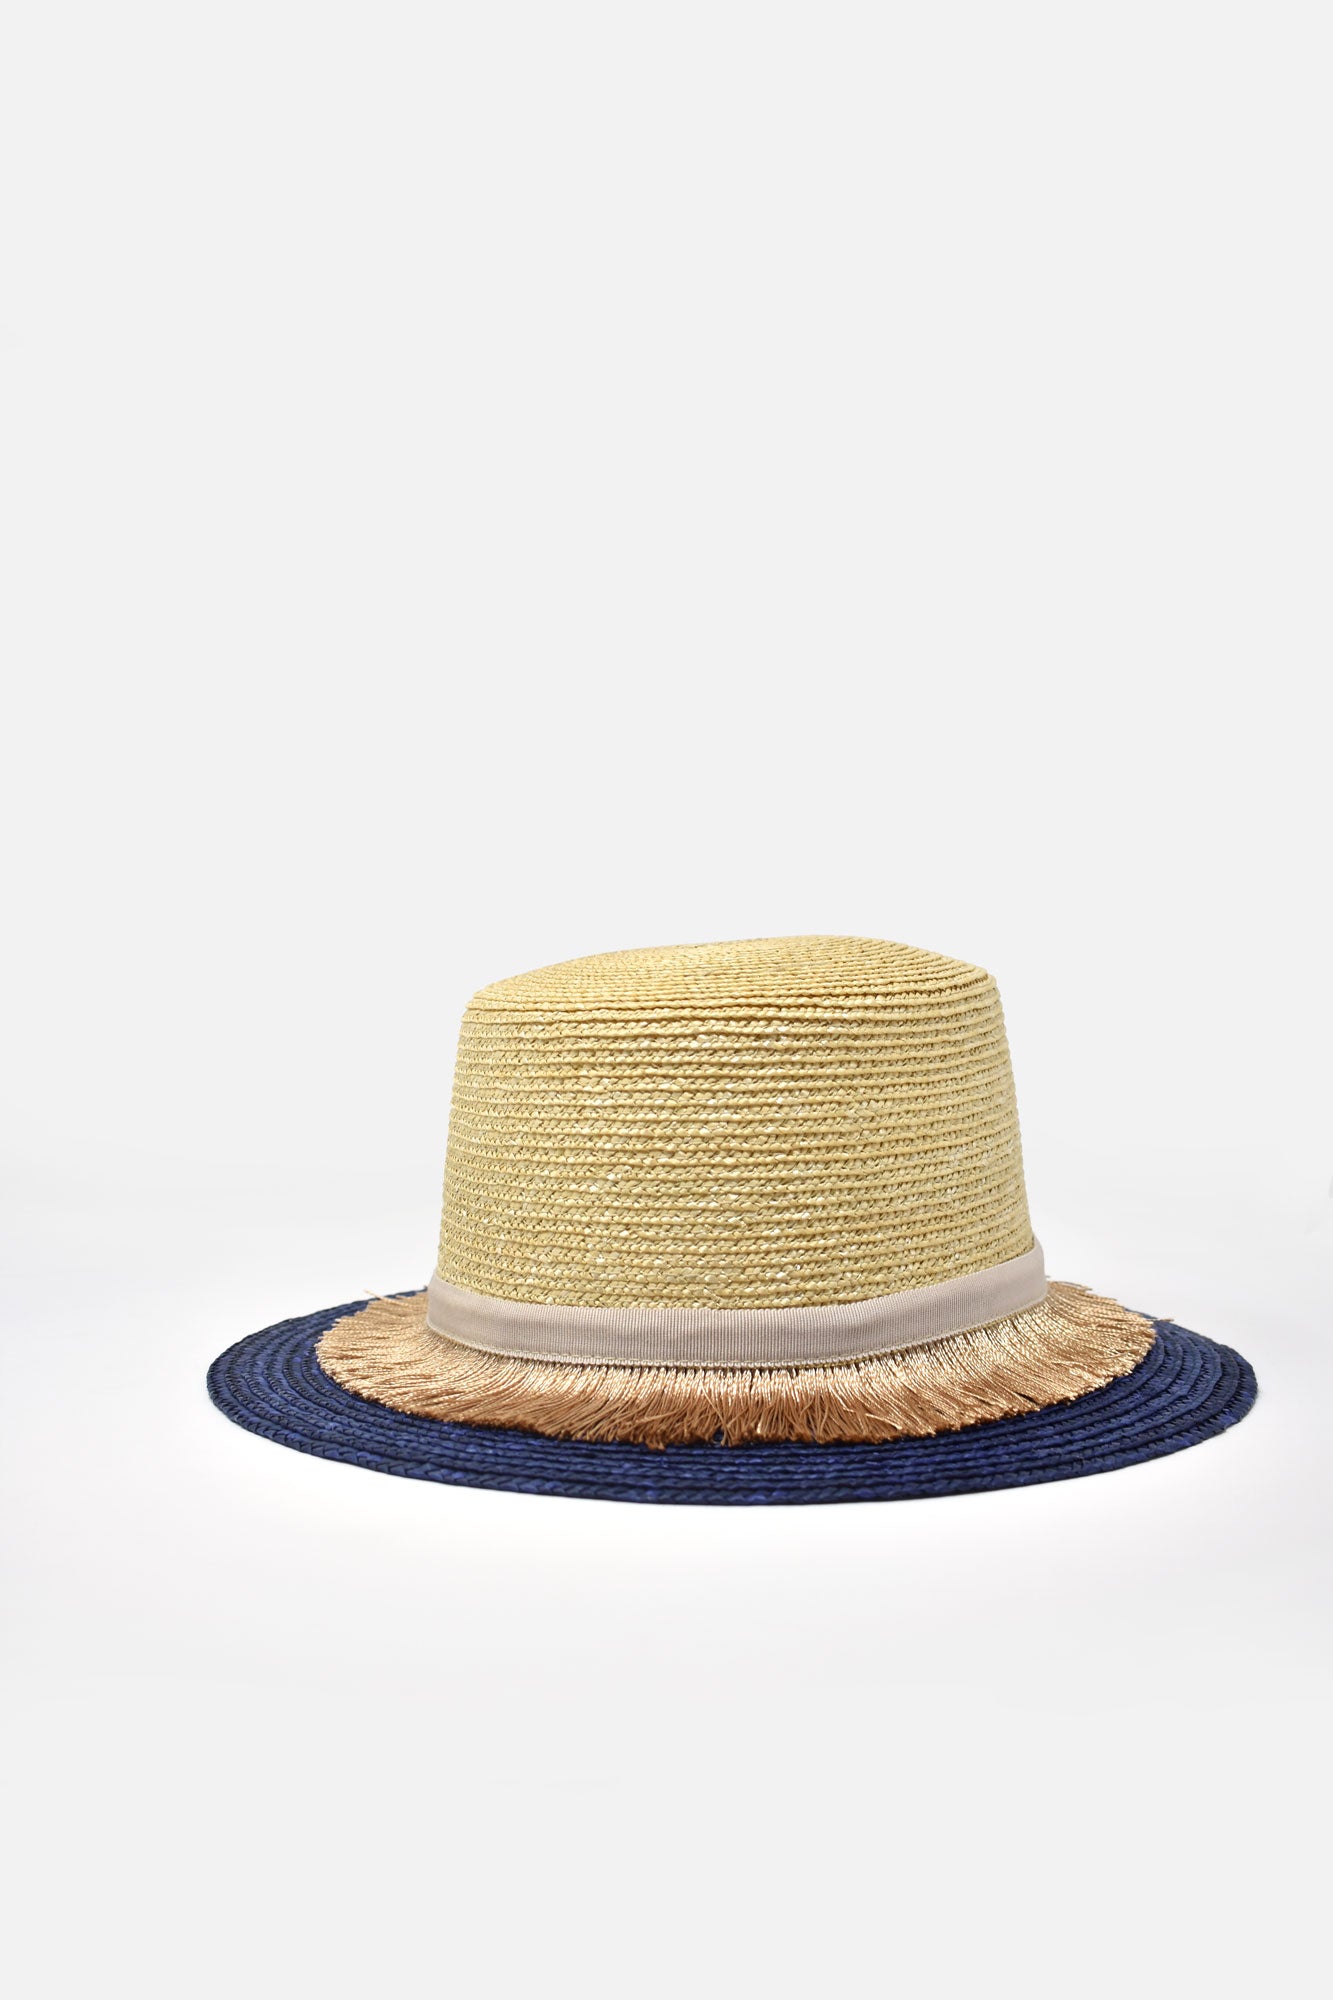 Aurorette Two Tone Tasseled French Boater Hat